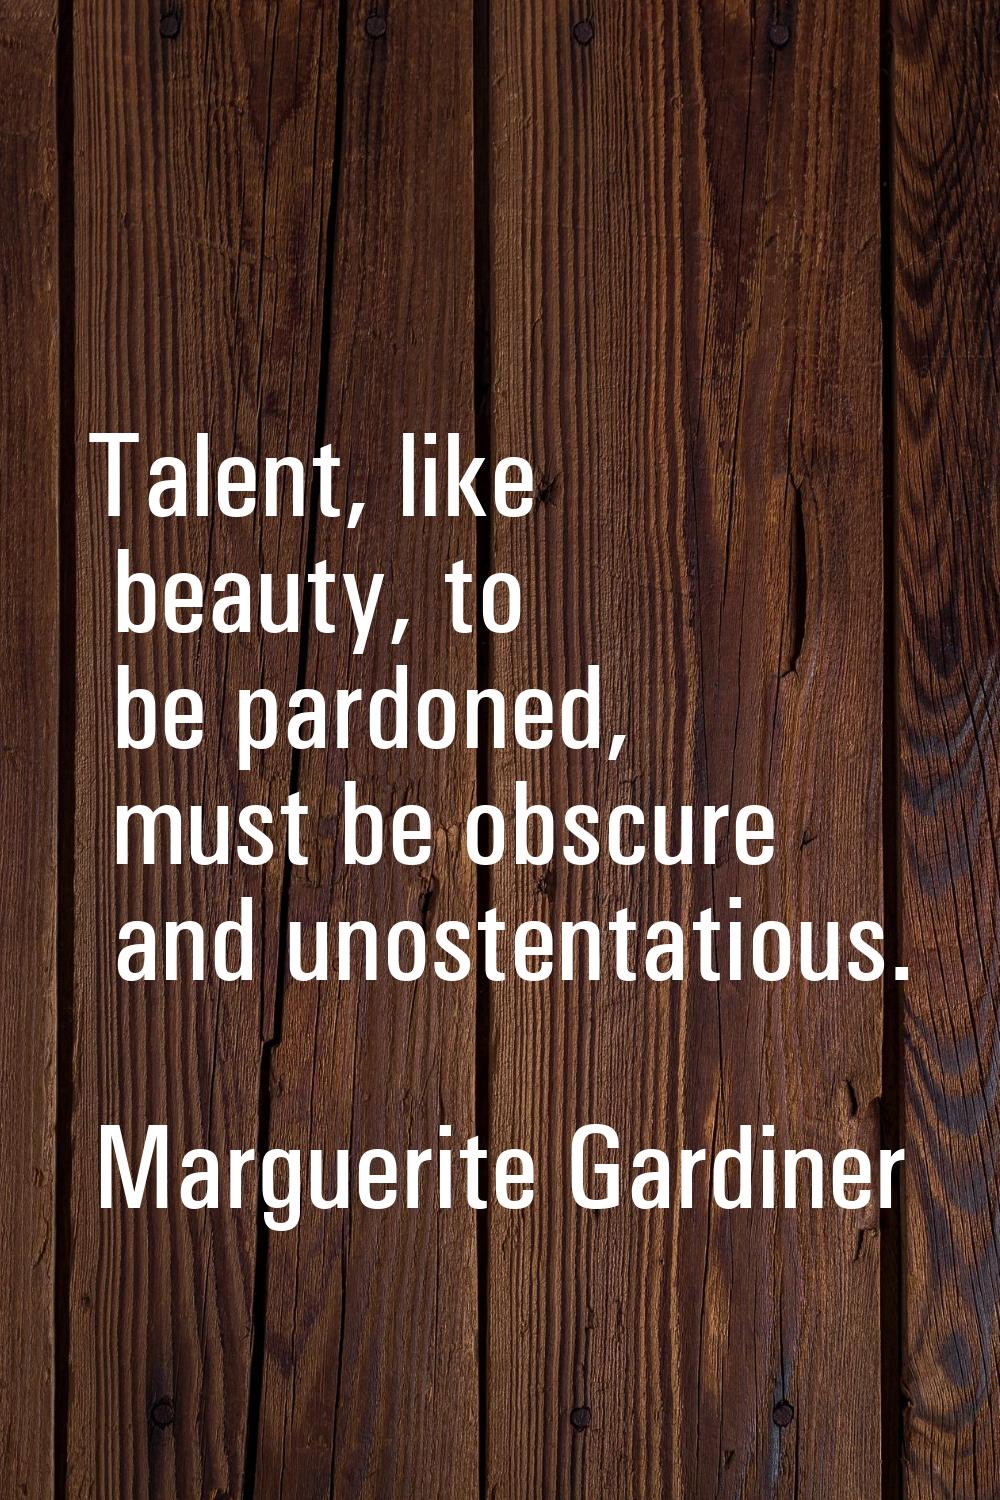 Talent, like beauty, to be pardoned, must be obscure and unostentatious.